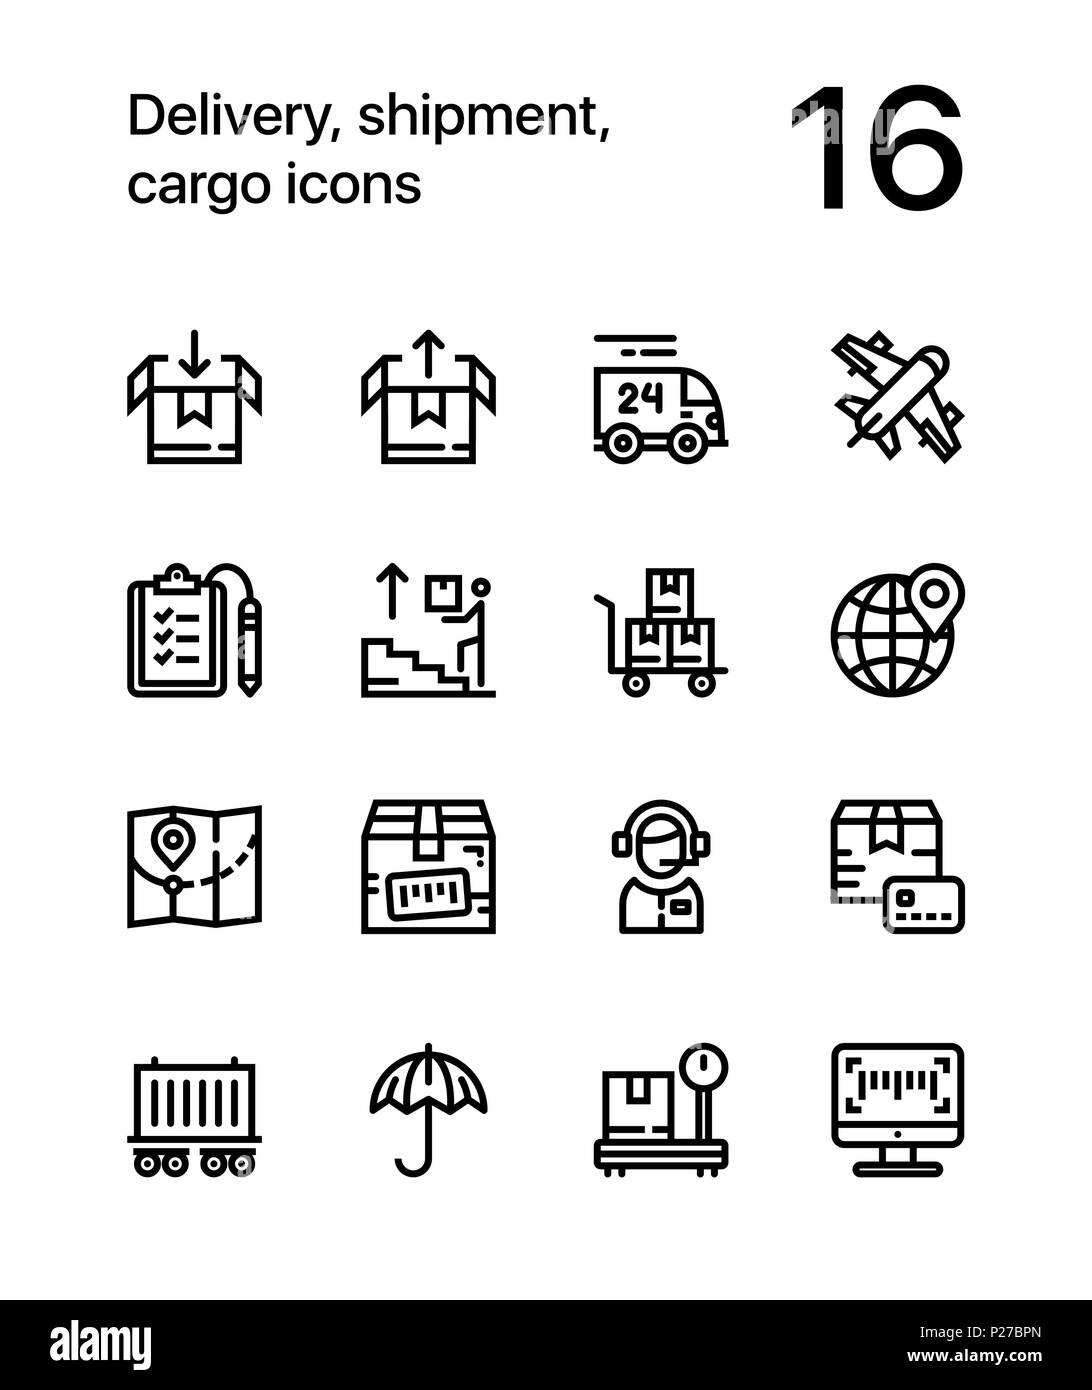 Delivery, shipment, cargo icons for web and mobile design pack 2 Stock Vector